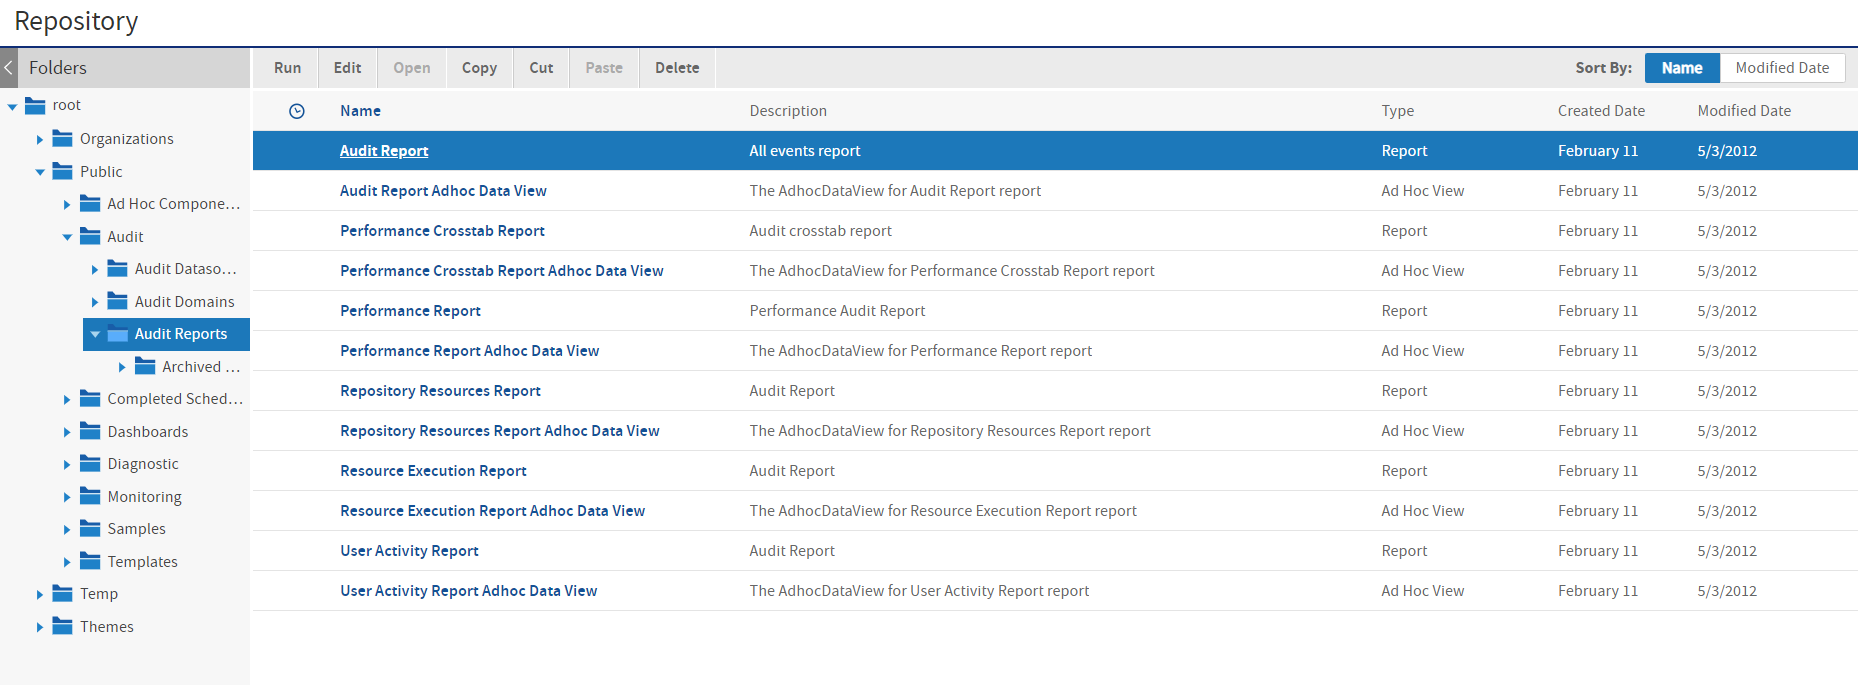 Screenshot of Trados Studio's repository showing folders with Audit Reports including Audit Report, Performance Crosstab Report, and Resource Execution Report.